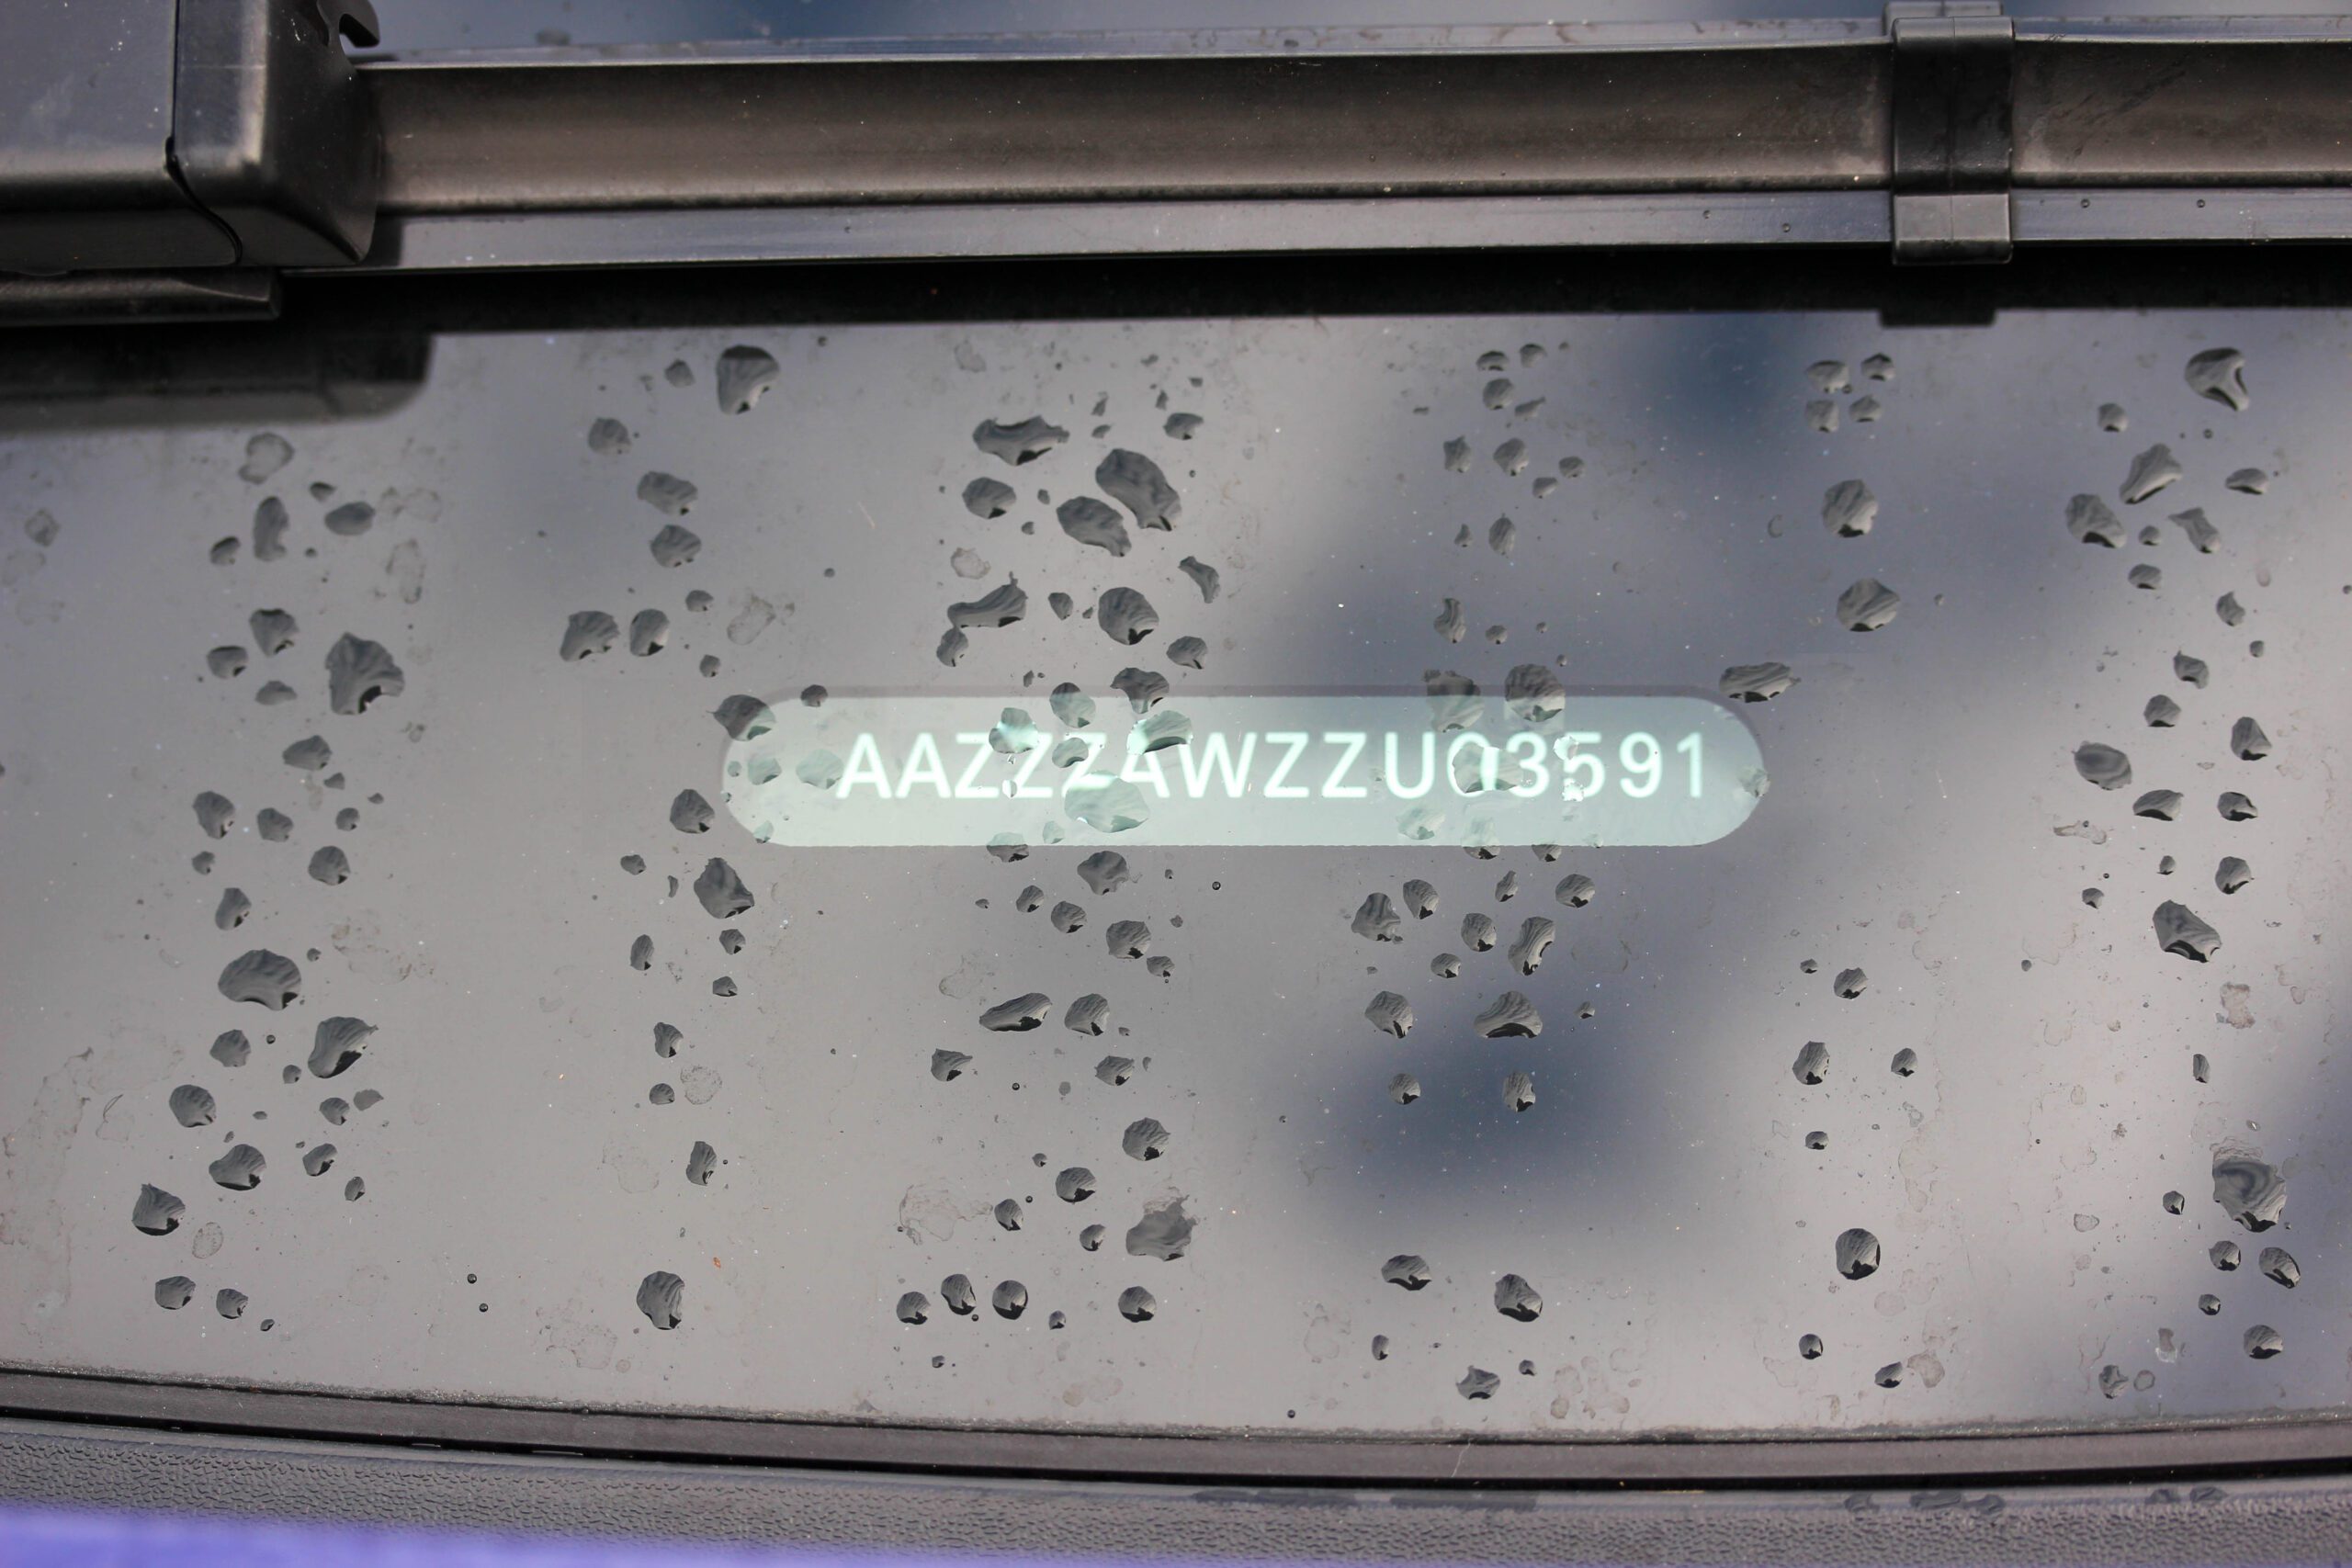 A VIN number is pictured in white writing affixed to the back windshield of a car splattered with rain.